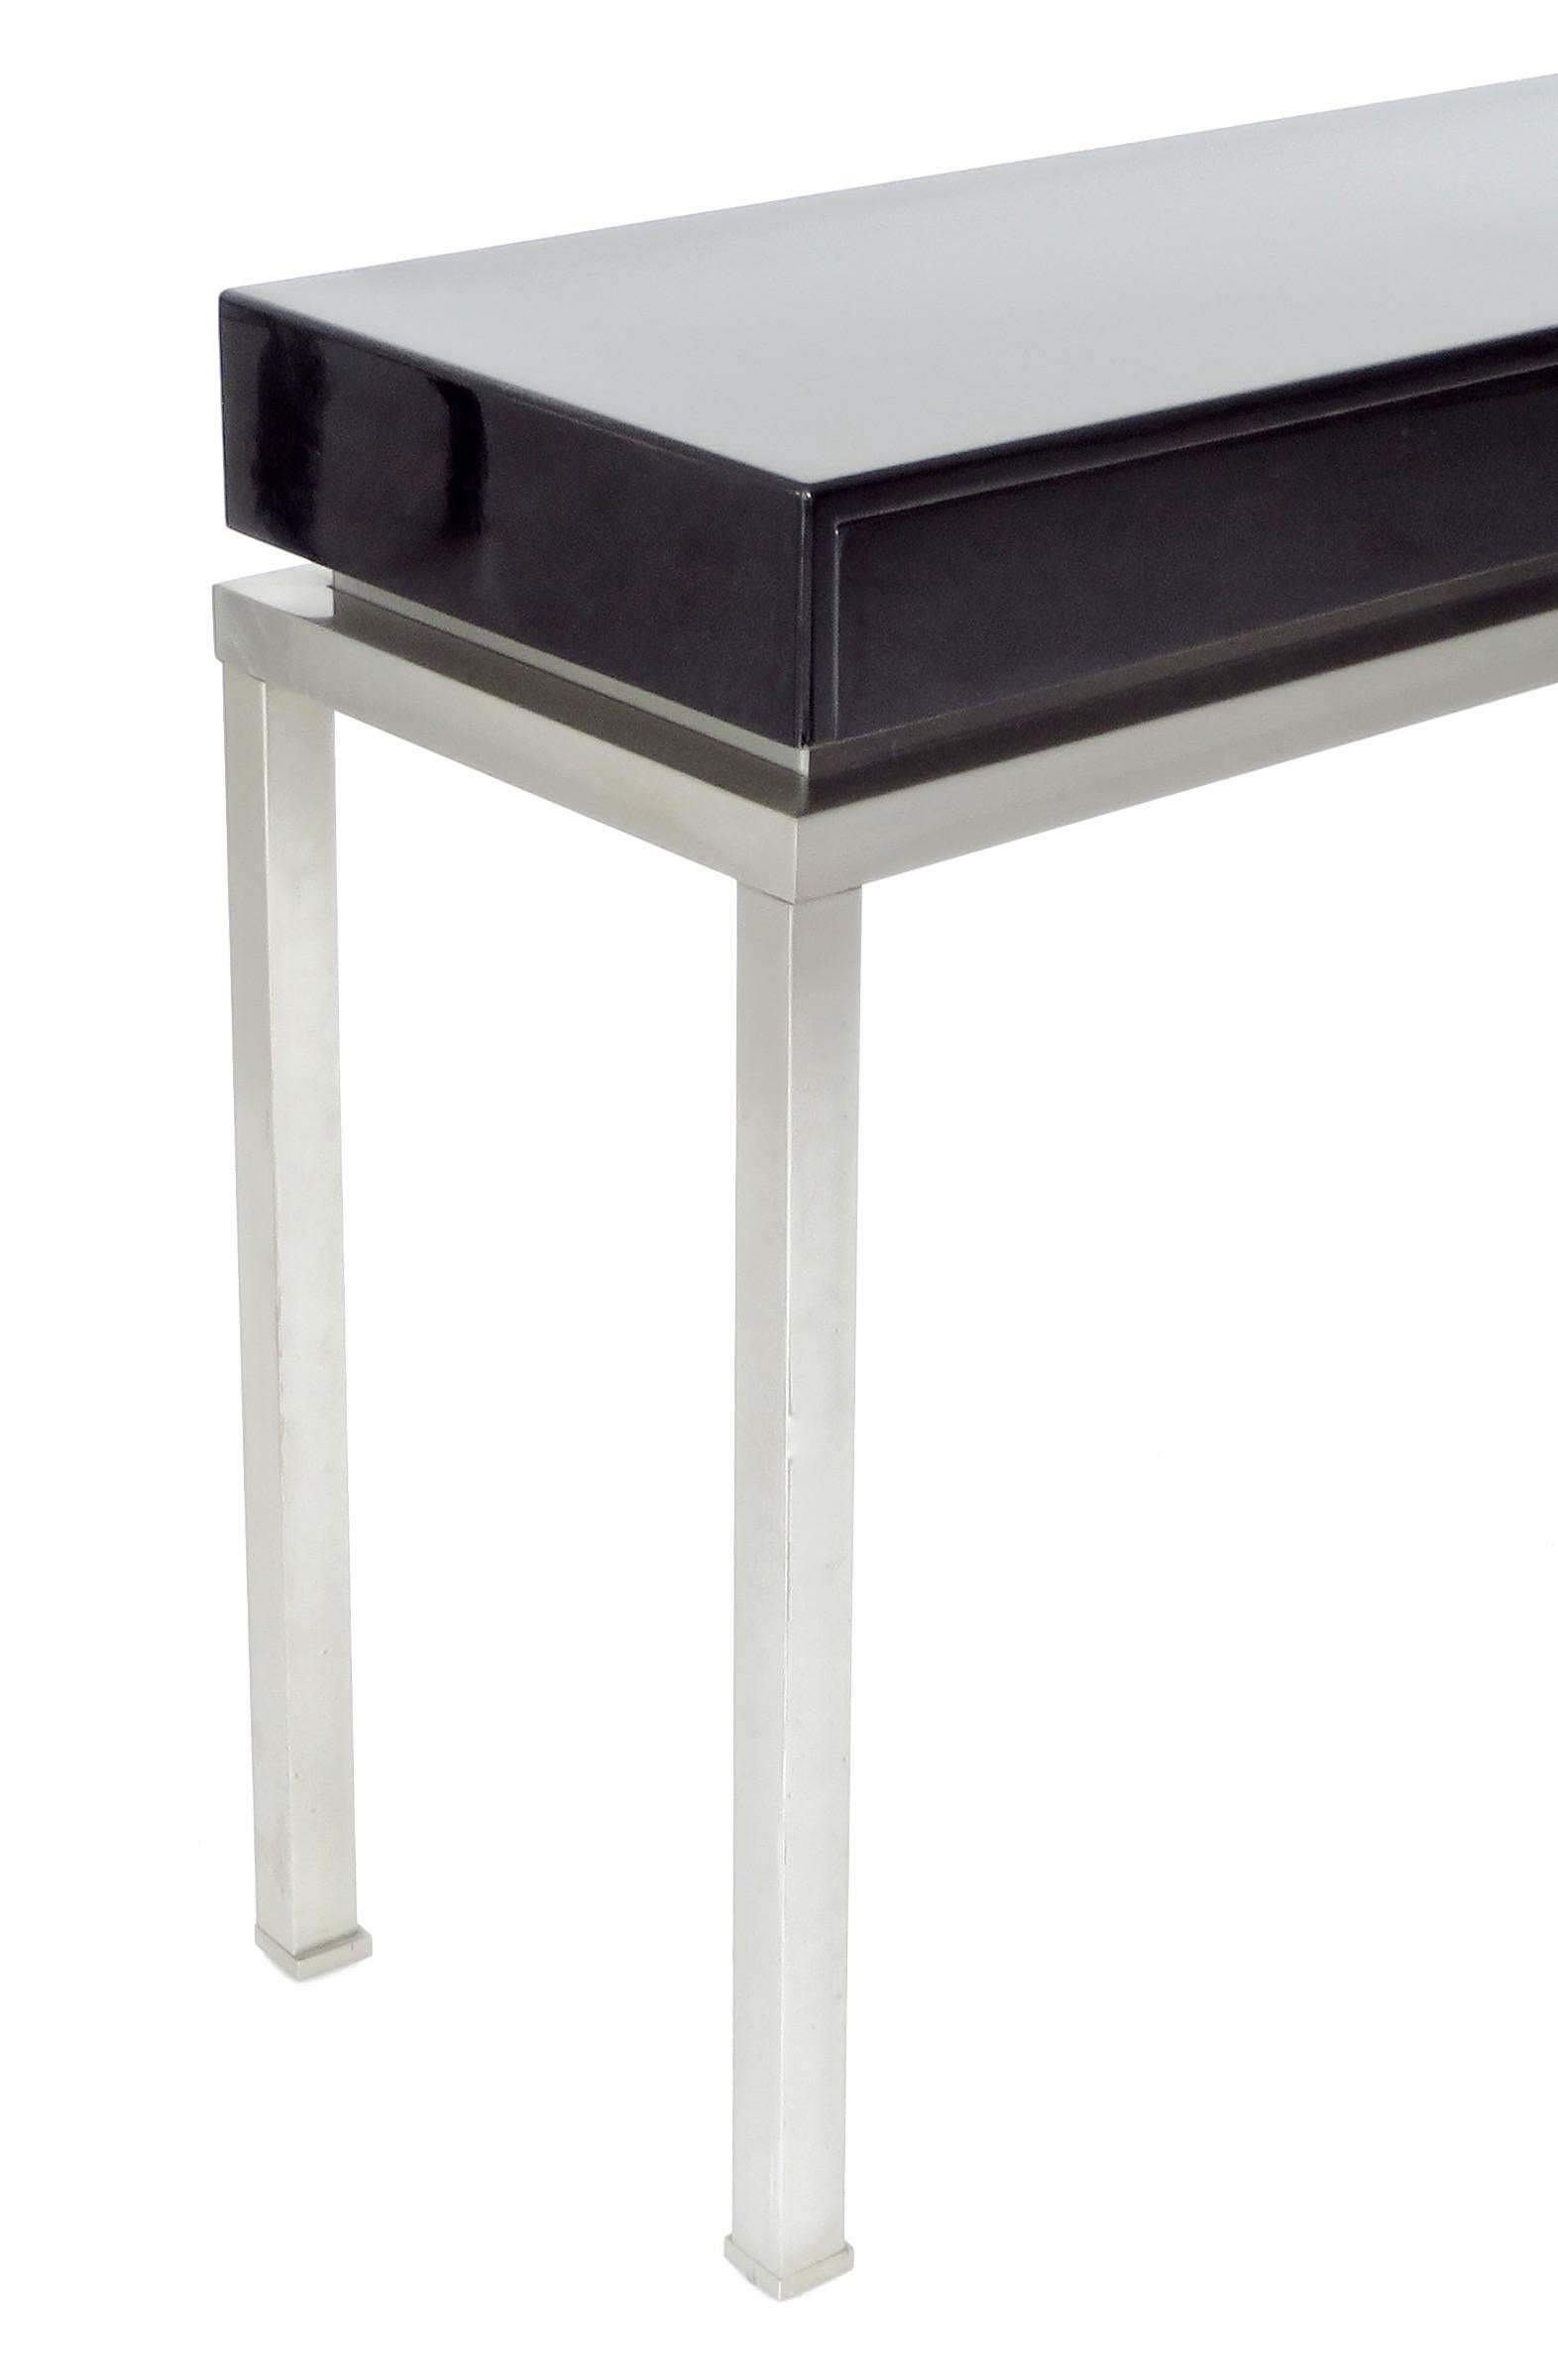  Maison Jansen French Black Lacquer and Brushed Stainless Steel Legs Console 3